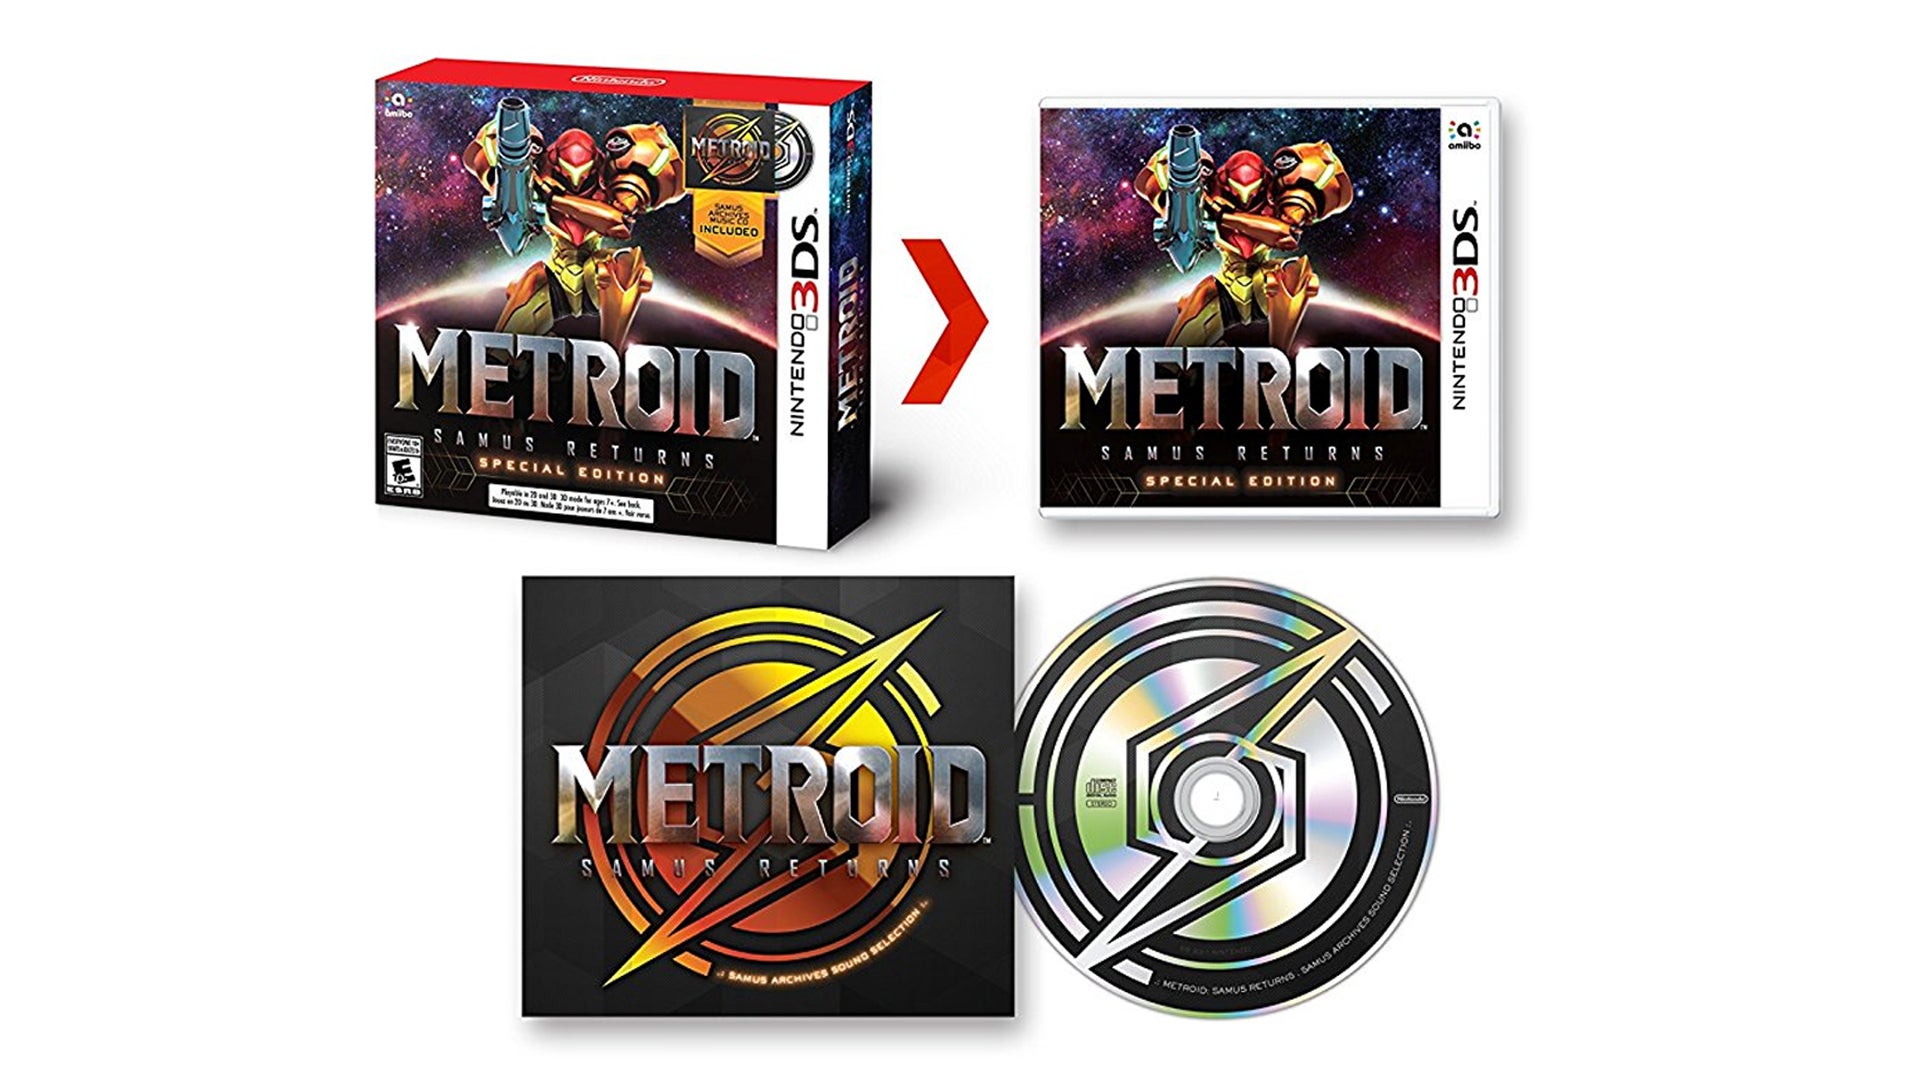 Image for The Metroid: Samus Returns Special Edition Is in Stock at Amazon